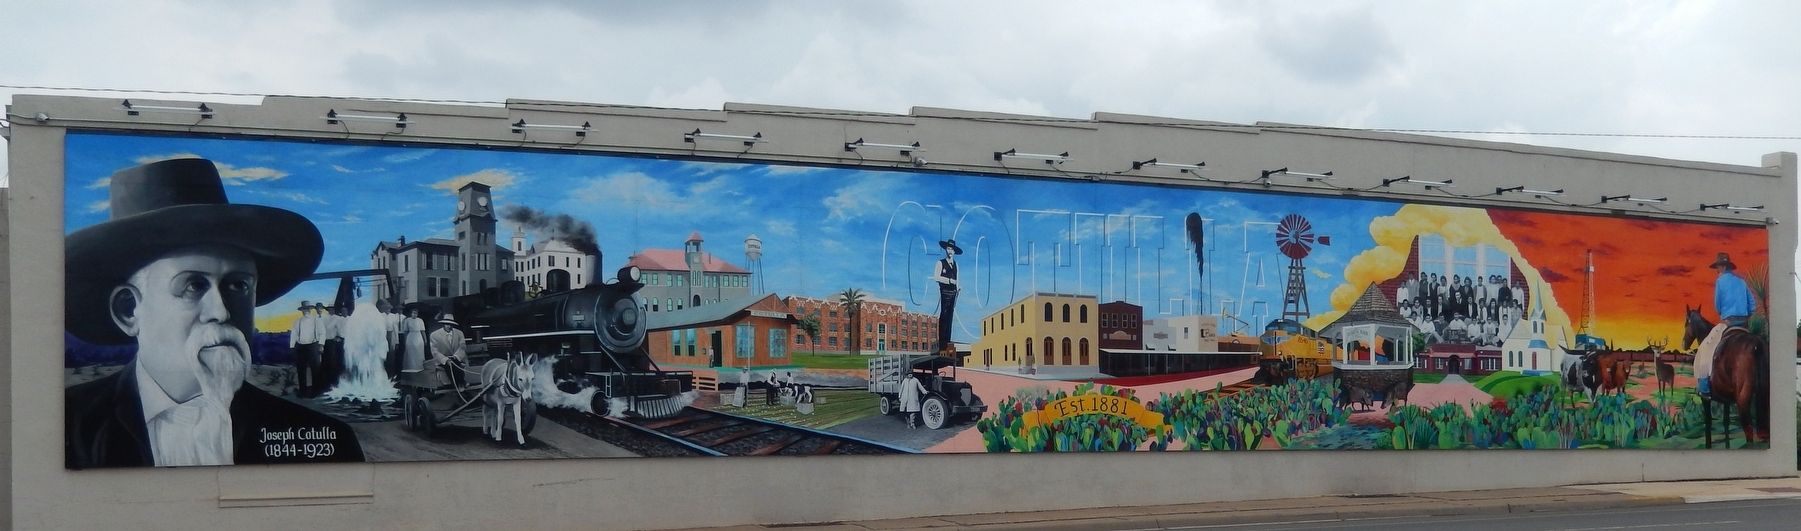 Joseph Cotulla Mural (<i>covers entire west wall of building across Main Street from marker</i>) image. Click for full size.